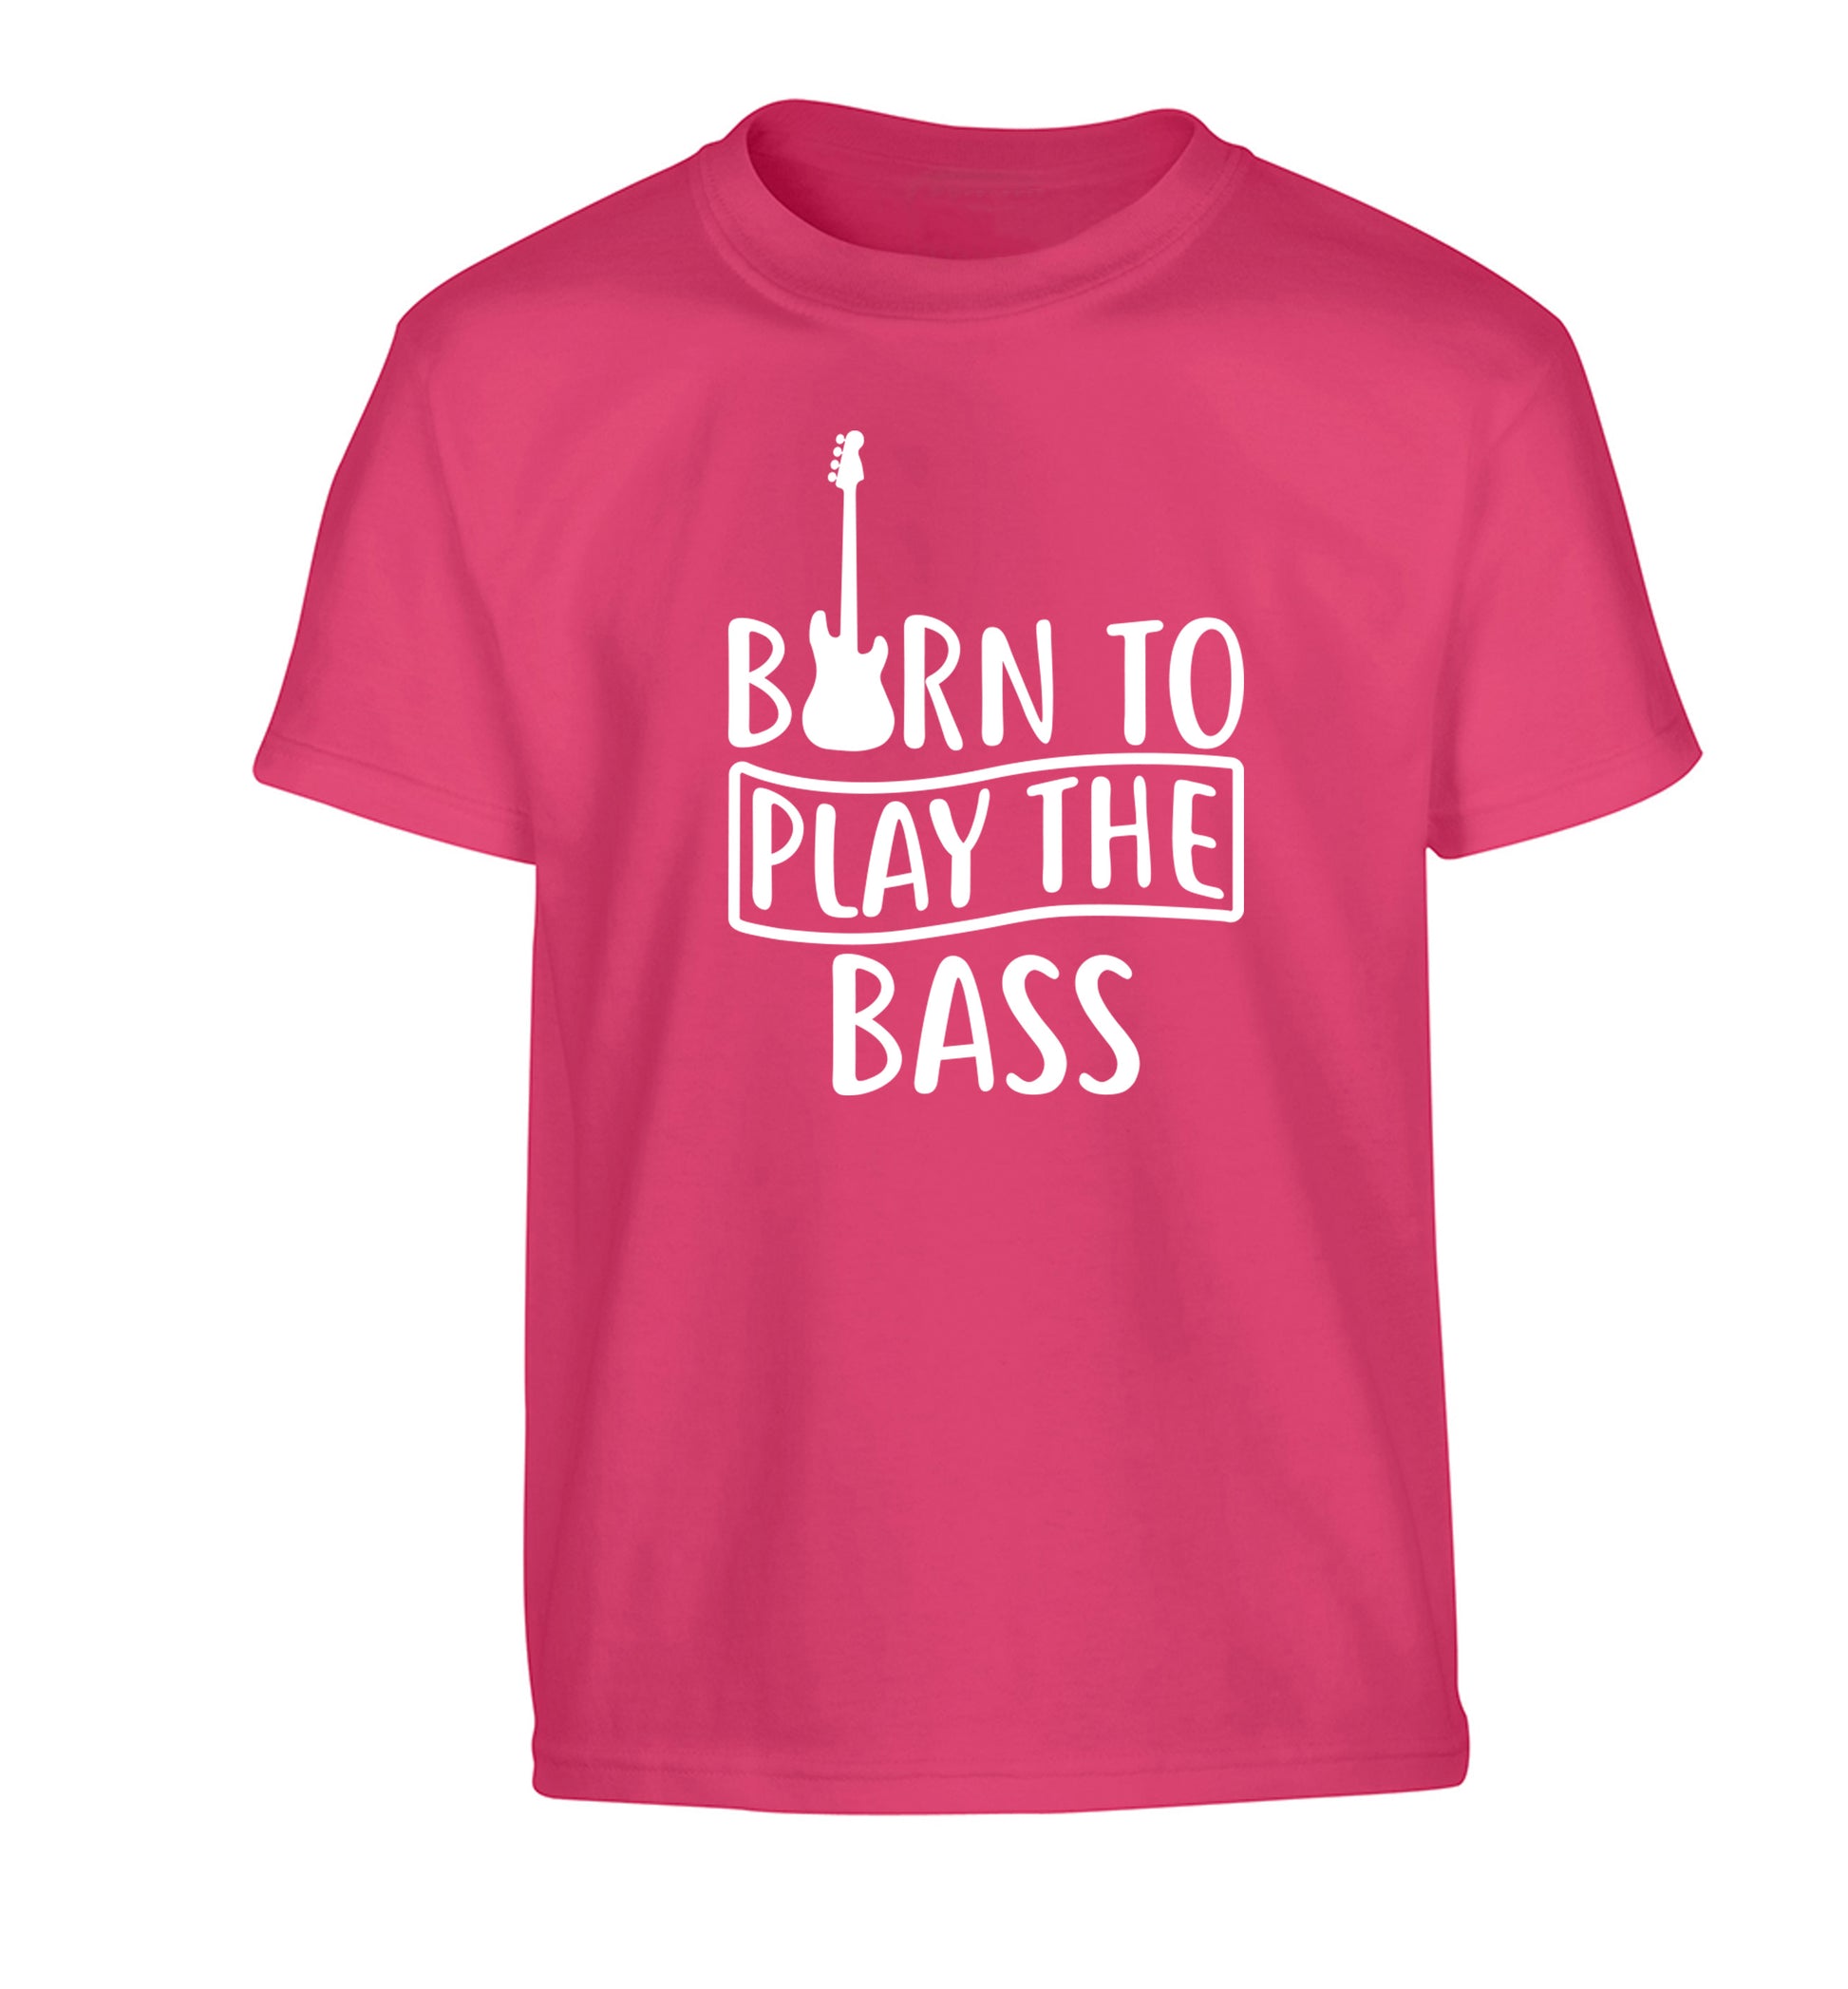 Born to play the bass Children's pink Tshirt 12-14 Years